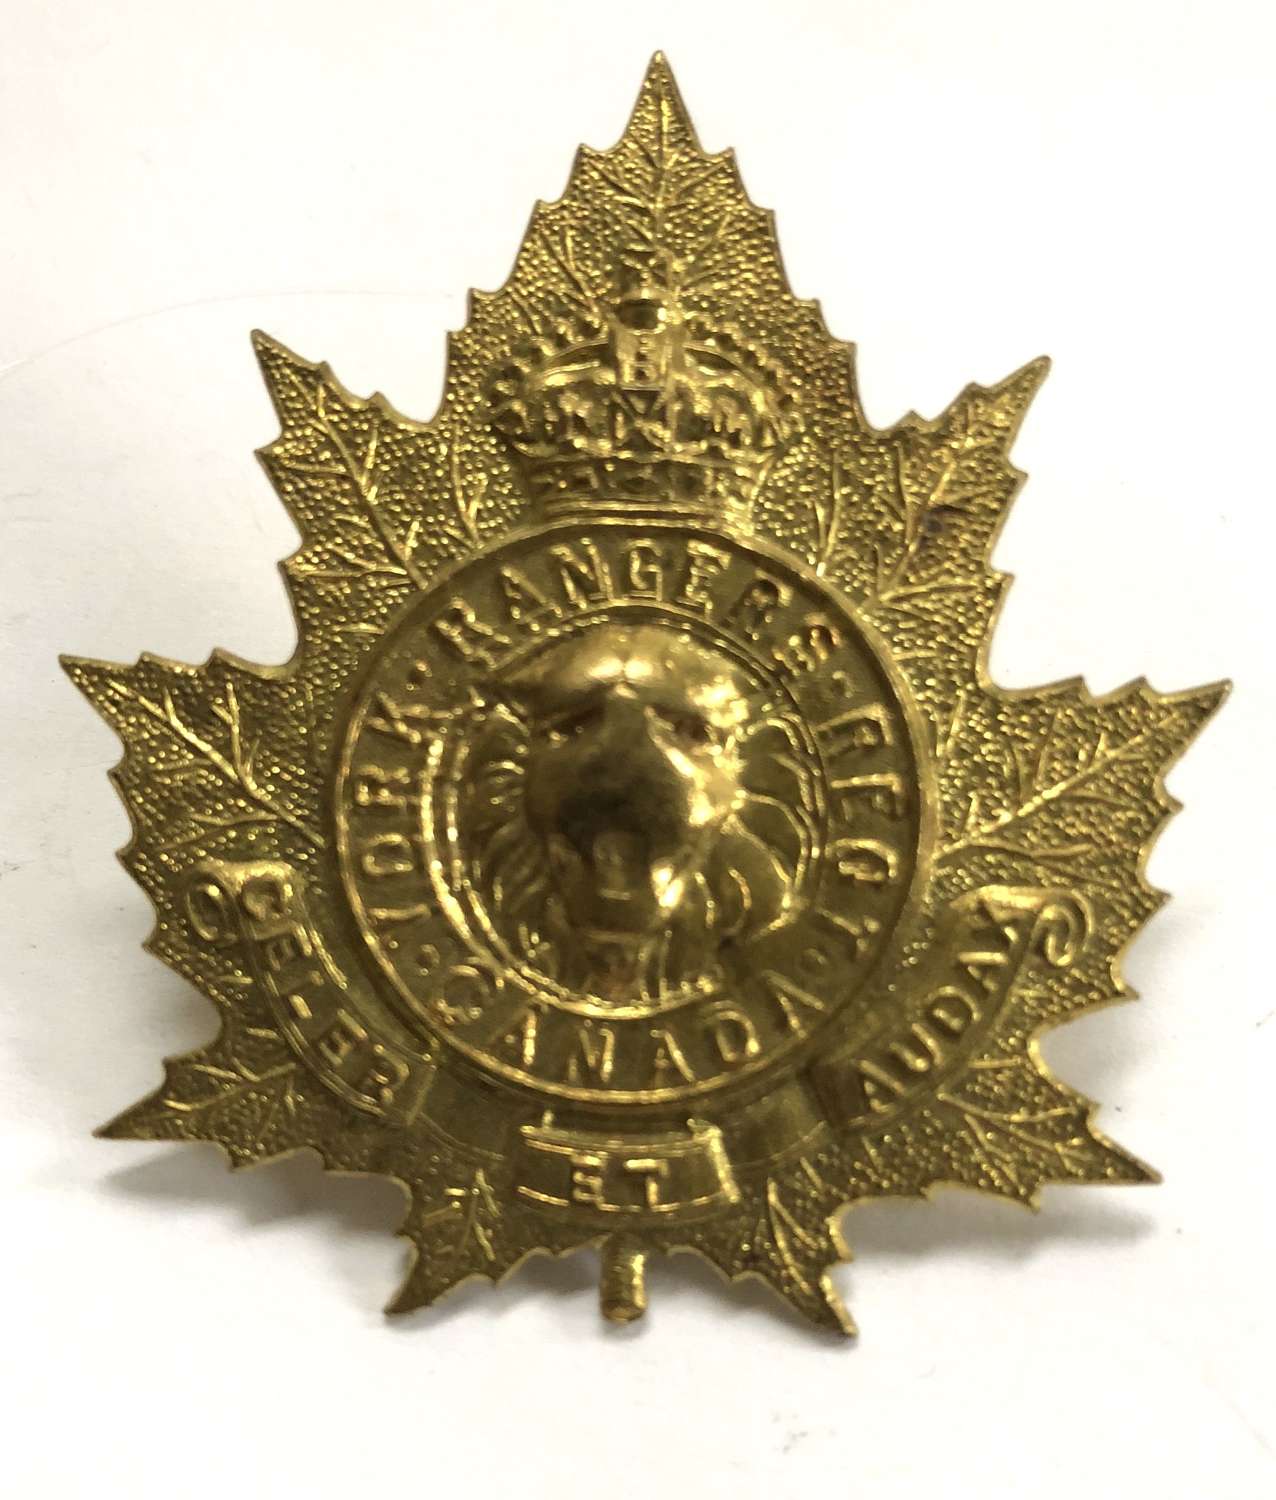 Canadian York Rangers cap badge circa 1922-36 by Scully, Montreal